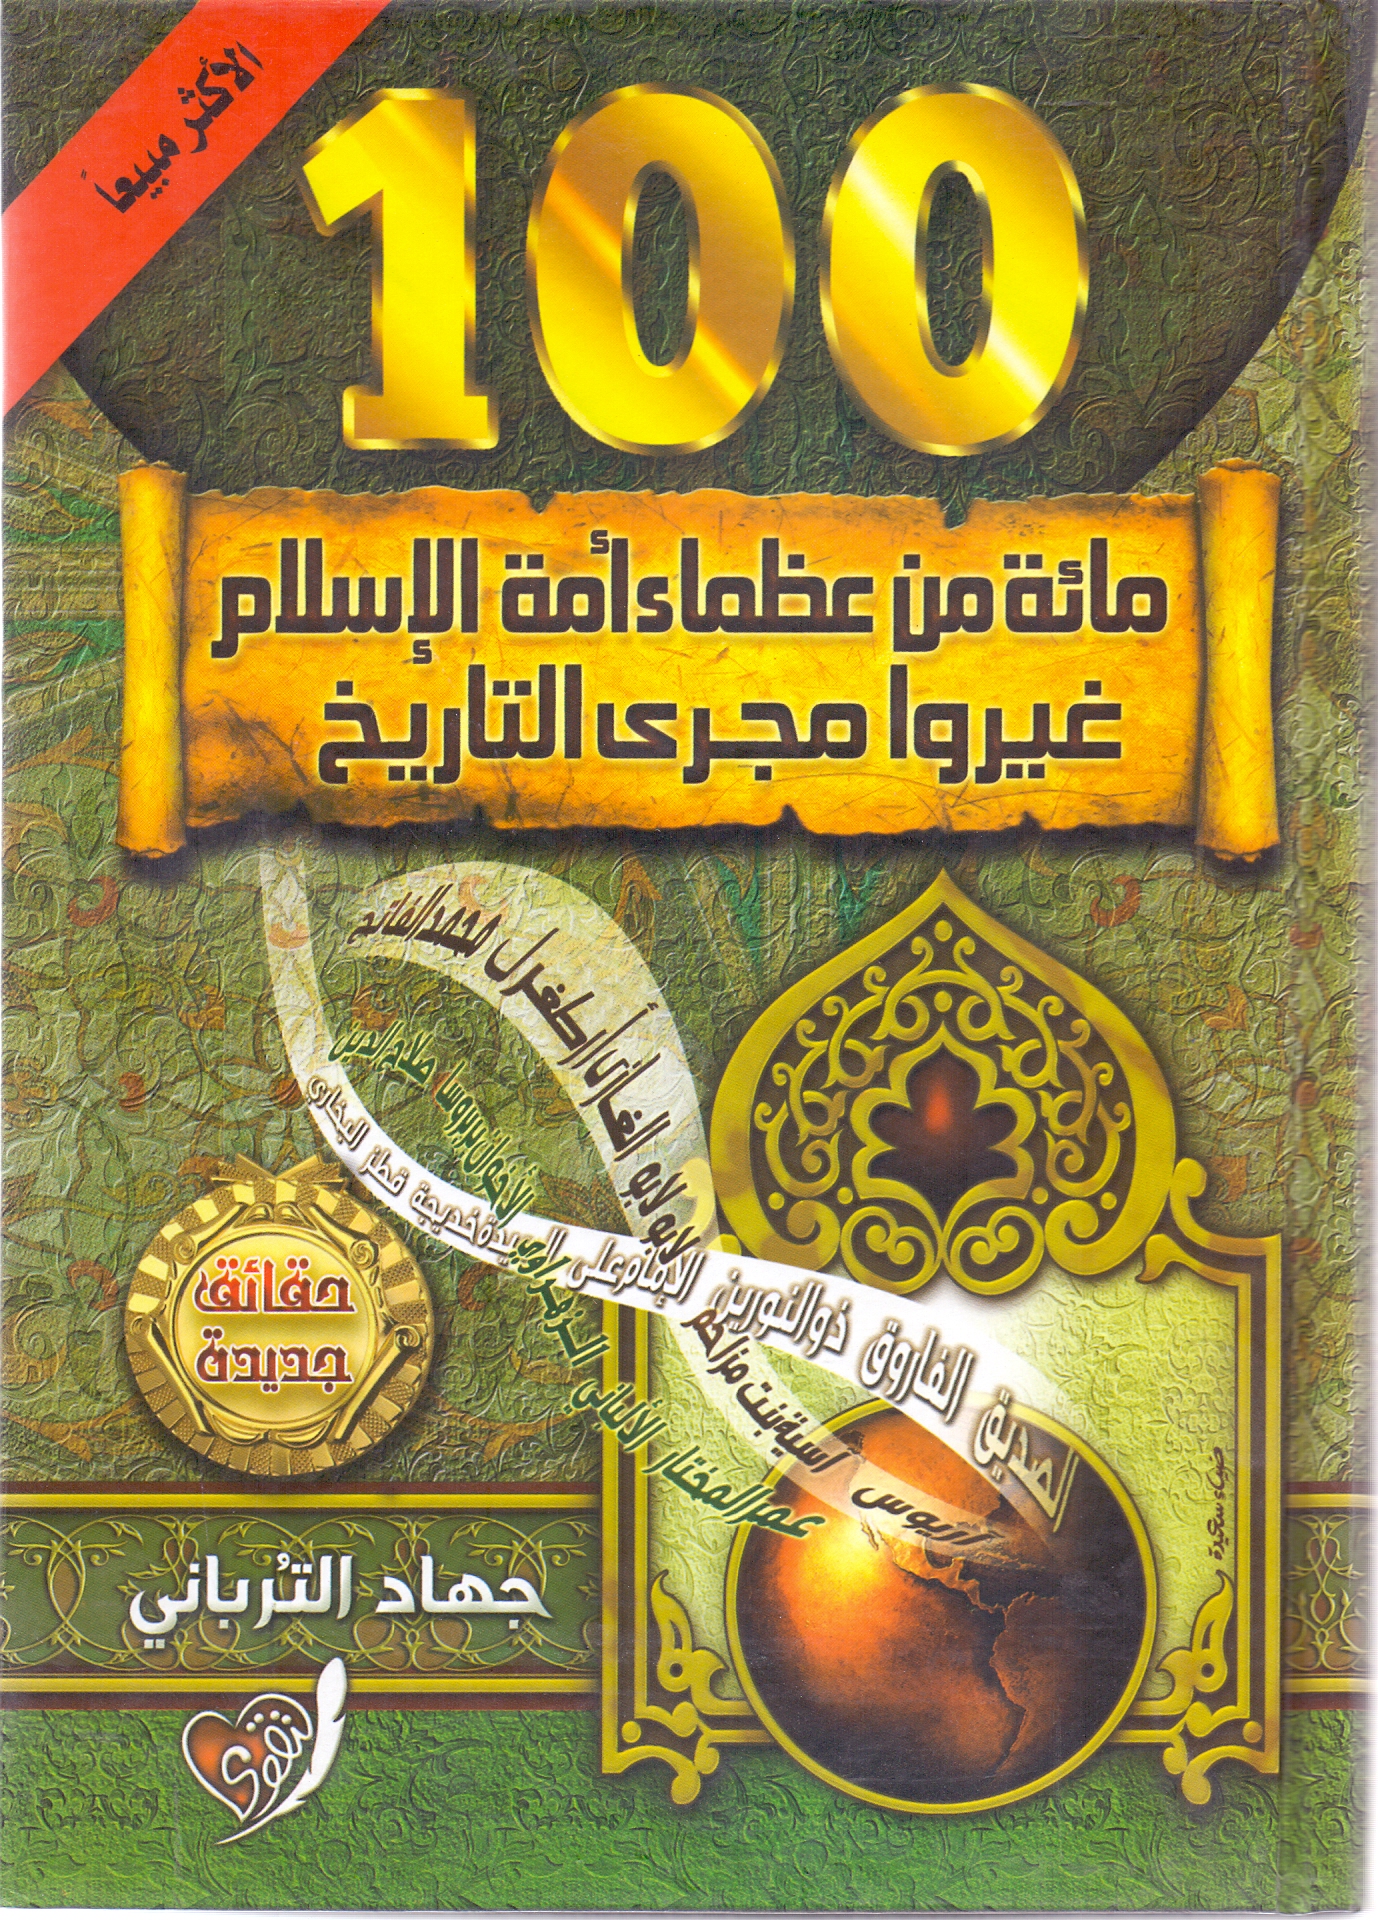 One hundred of Great men of the ummah of Islam
